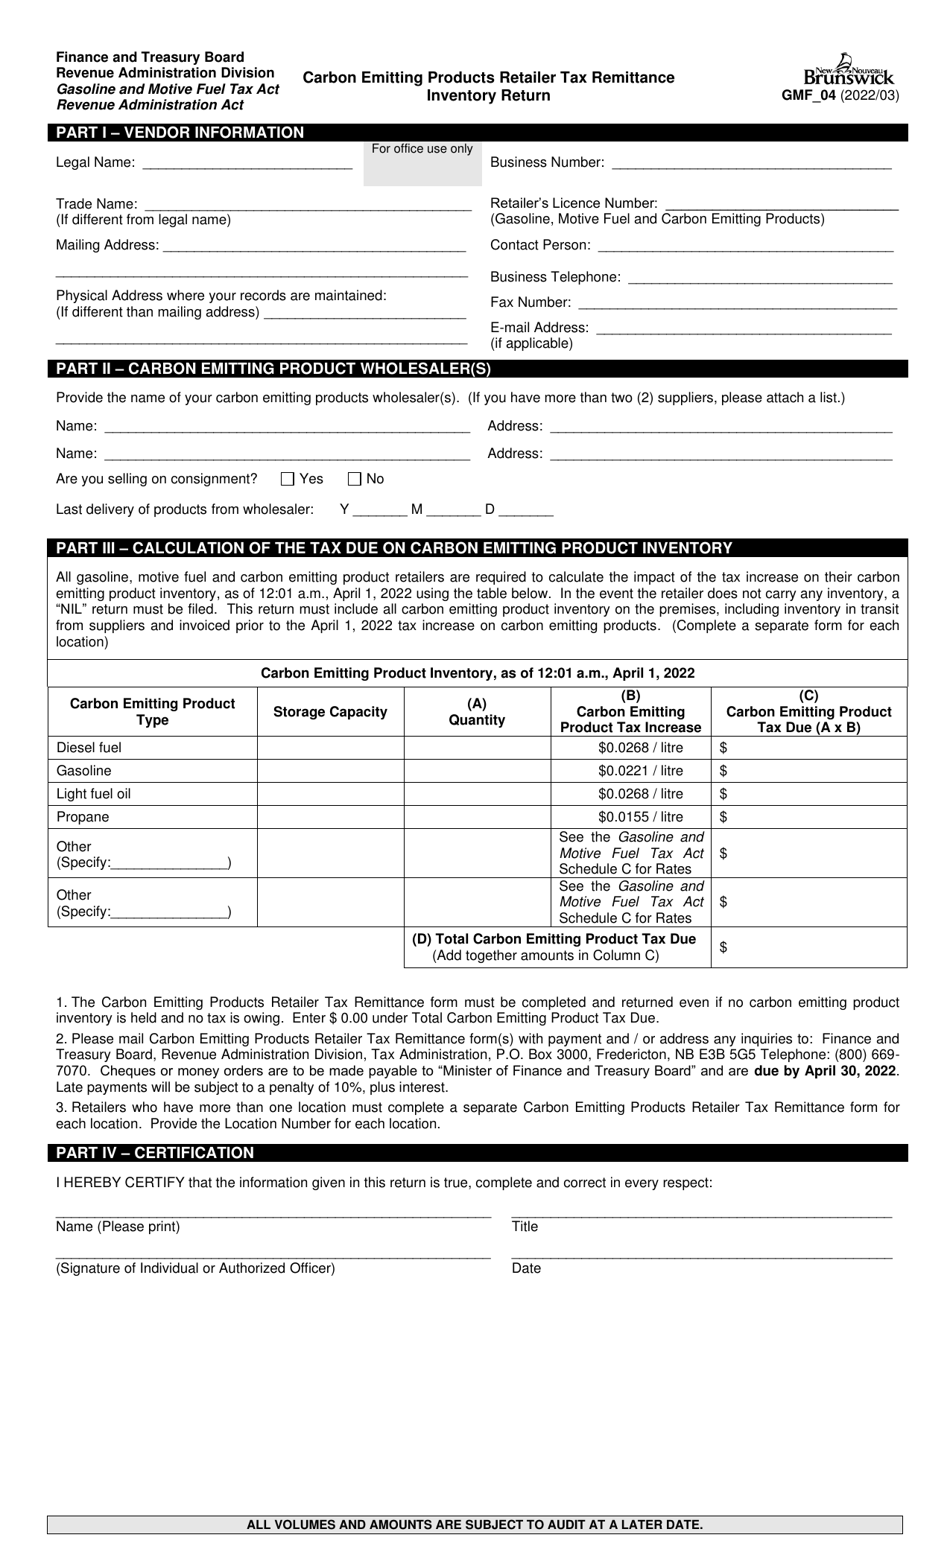 Form GMF_04 Carbon Emitting Products Retailer Tax Remittance Inventory Return - New Brunswick, Canada, Page 1